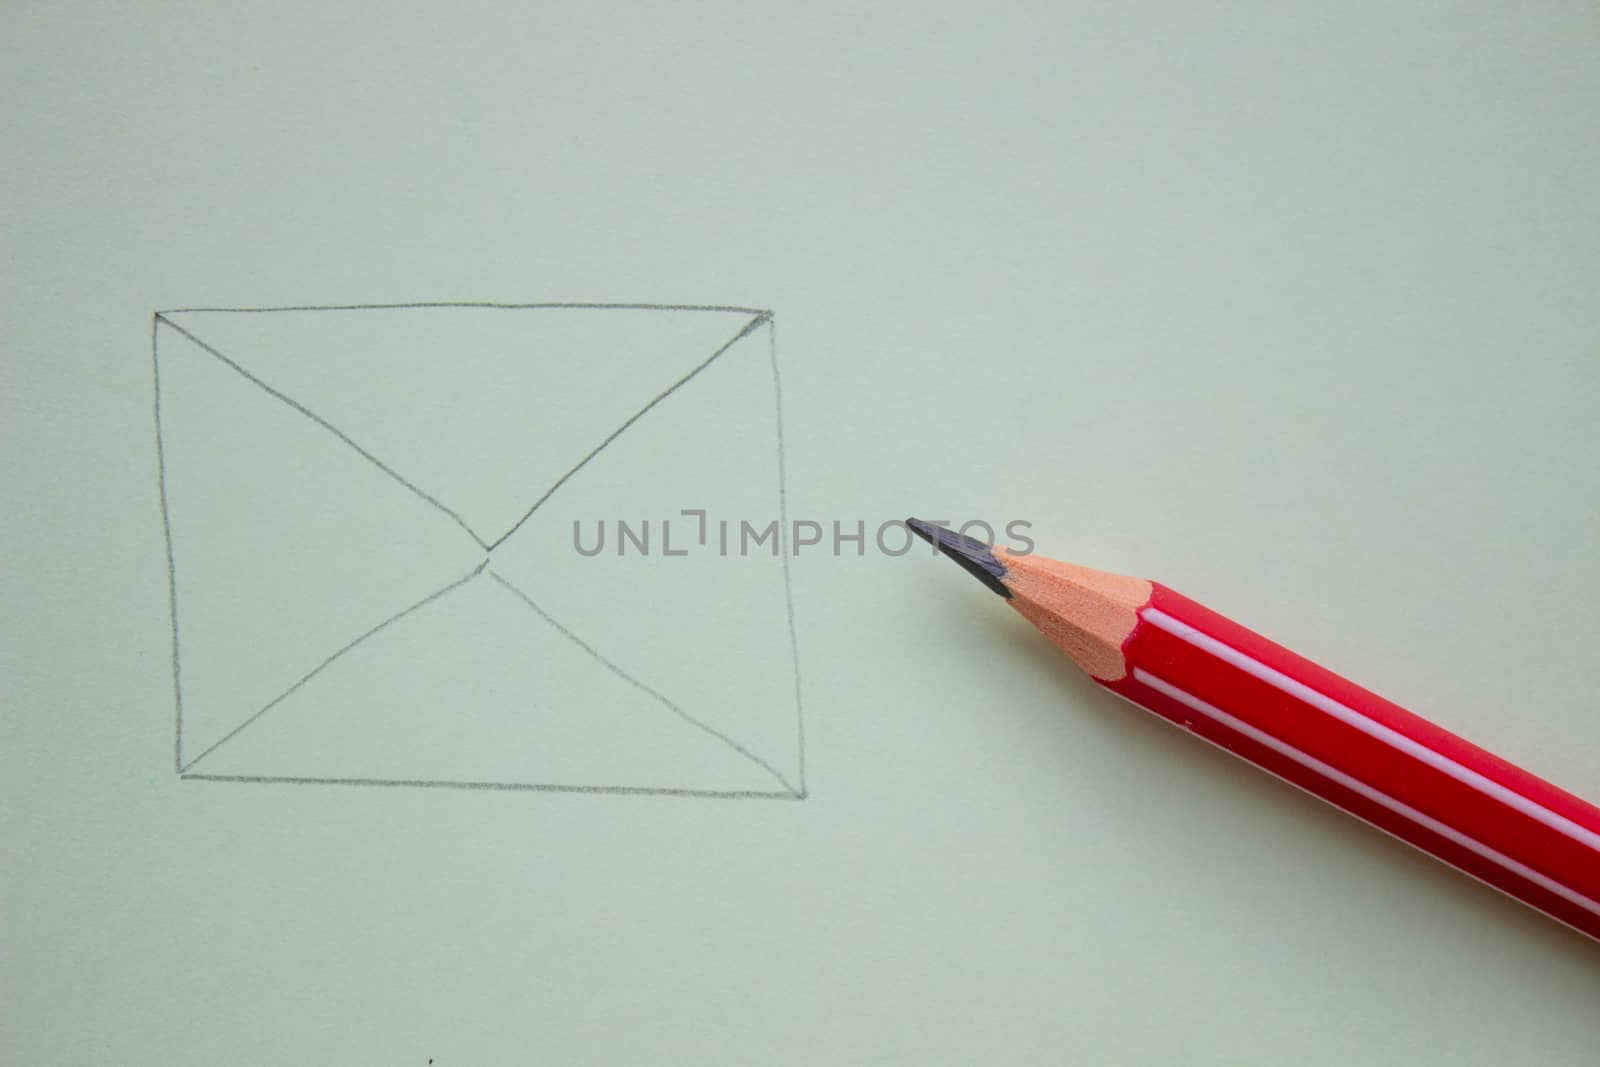 An envelope drawn in pencil on a paper sheet, Close-up. by AnatoliiFoto